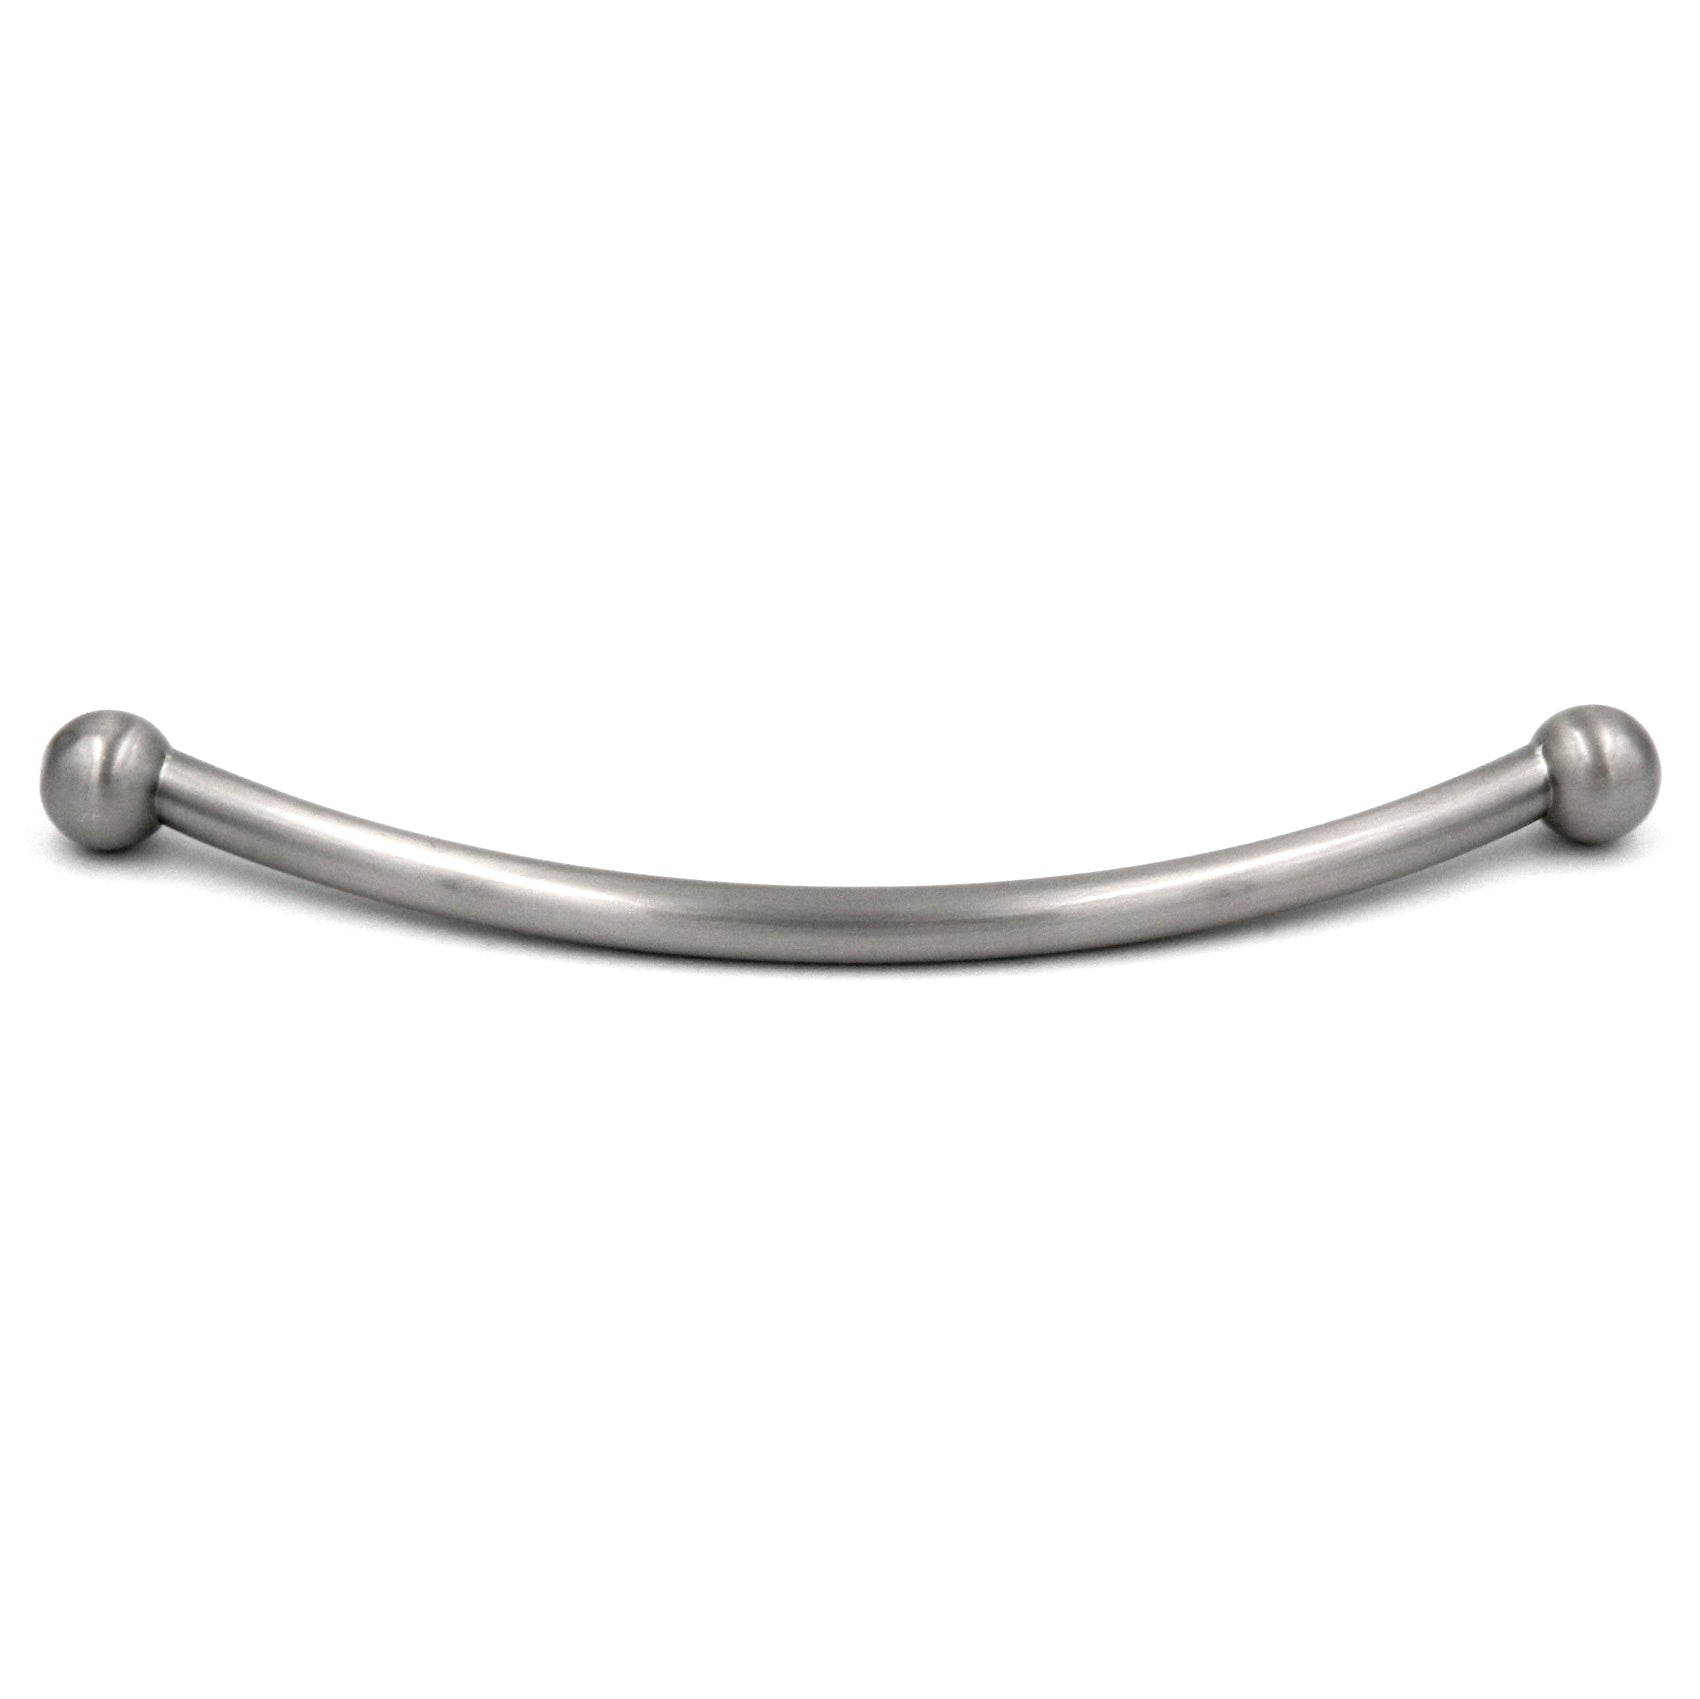 20 Pack Hickory Metropolis P2924-SN Satin Nickel 5" (128mm)cc Arch Cabinet Handle Pull